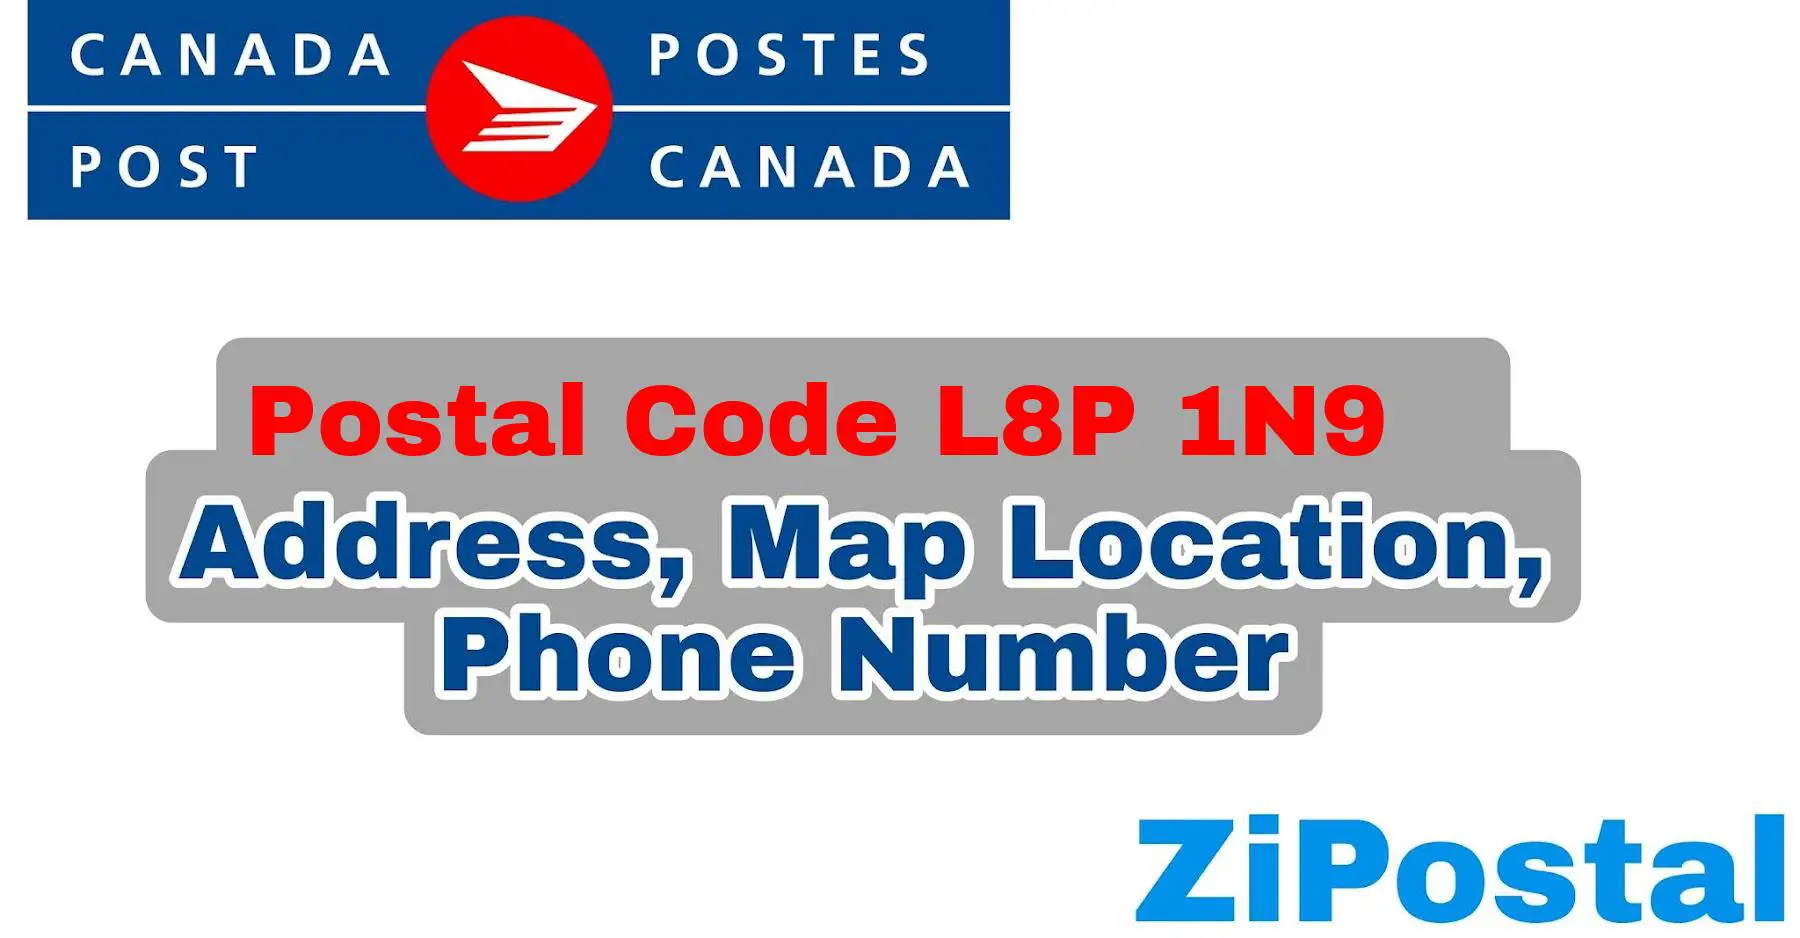 Postal Code L8P 1N9 Address Map Location and Phone Number